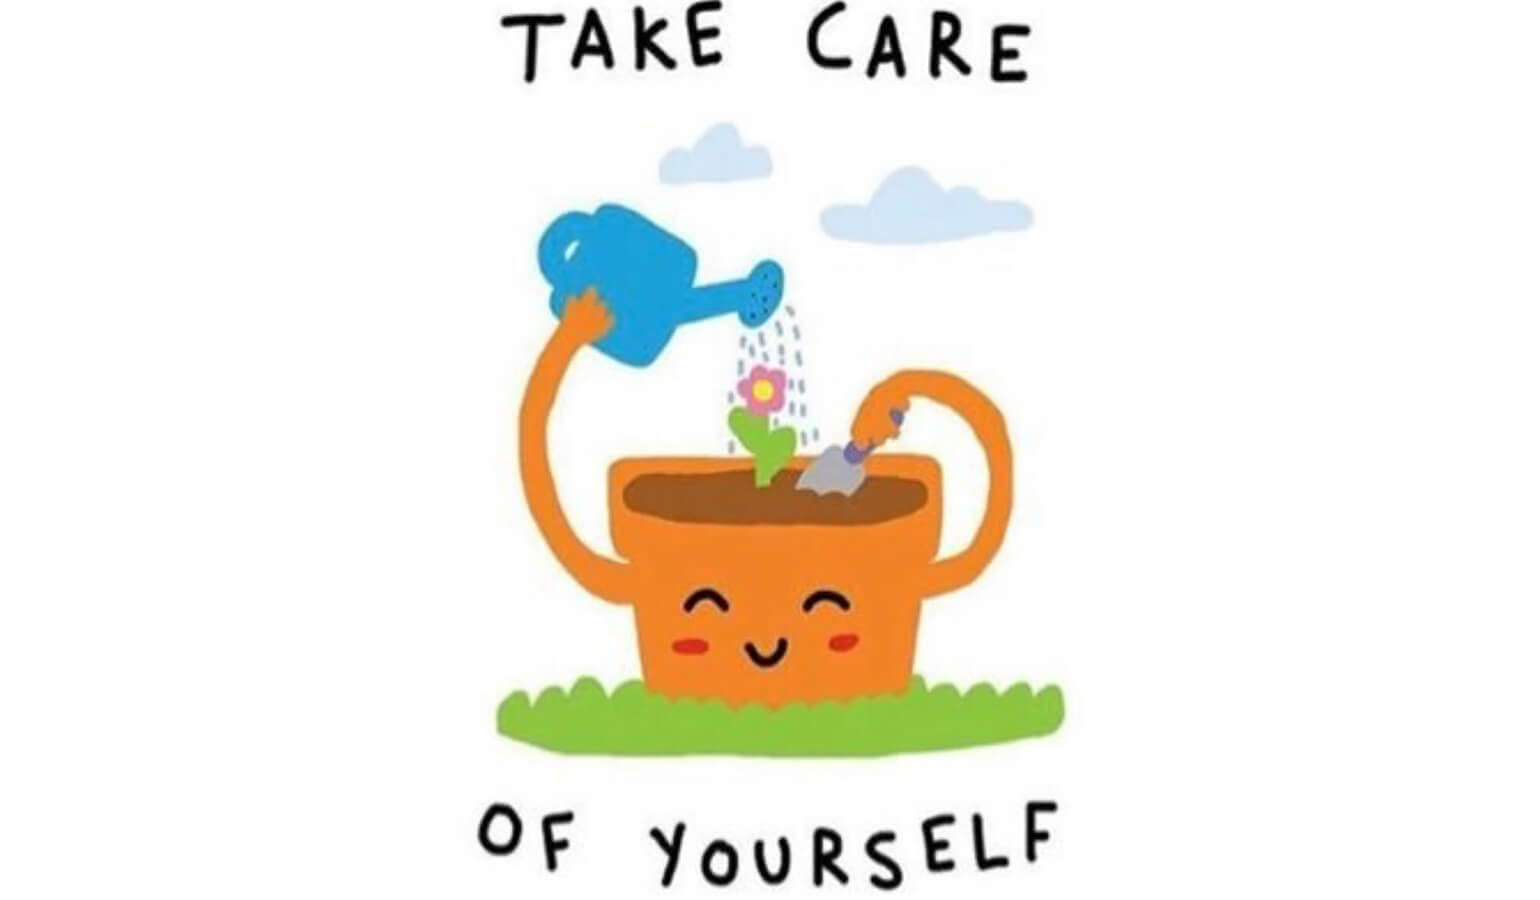 Drawing of a garden pot with a face and arms. The pot is watering a flower that is in it with a smile on their face. The words 'Take care of yourself' surround the image.